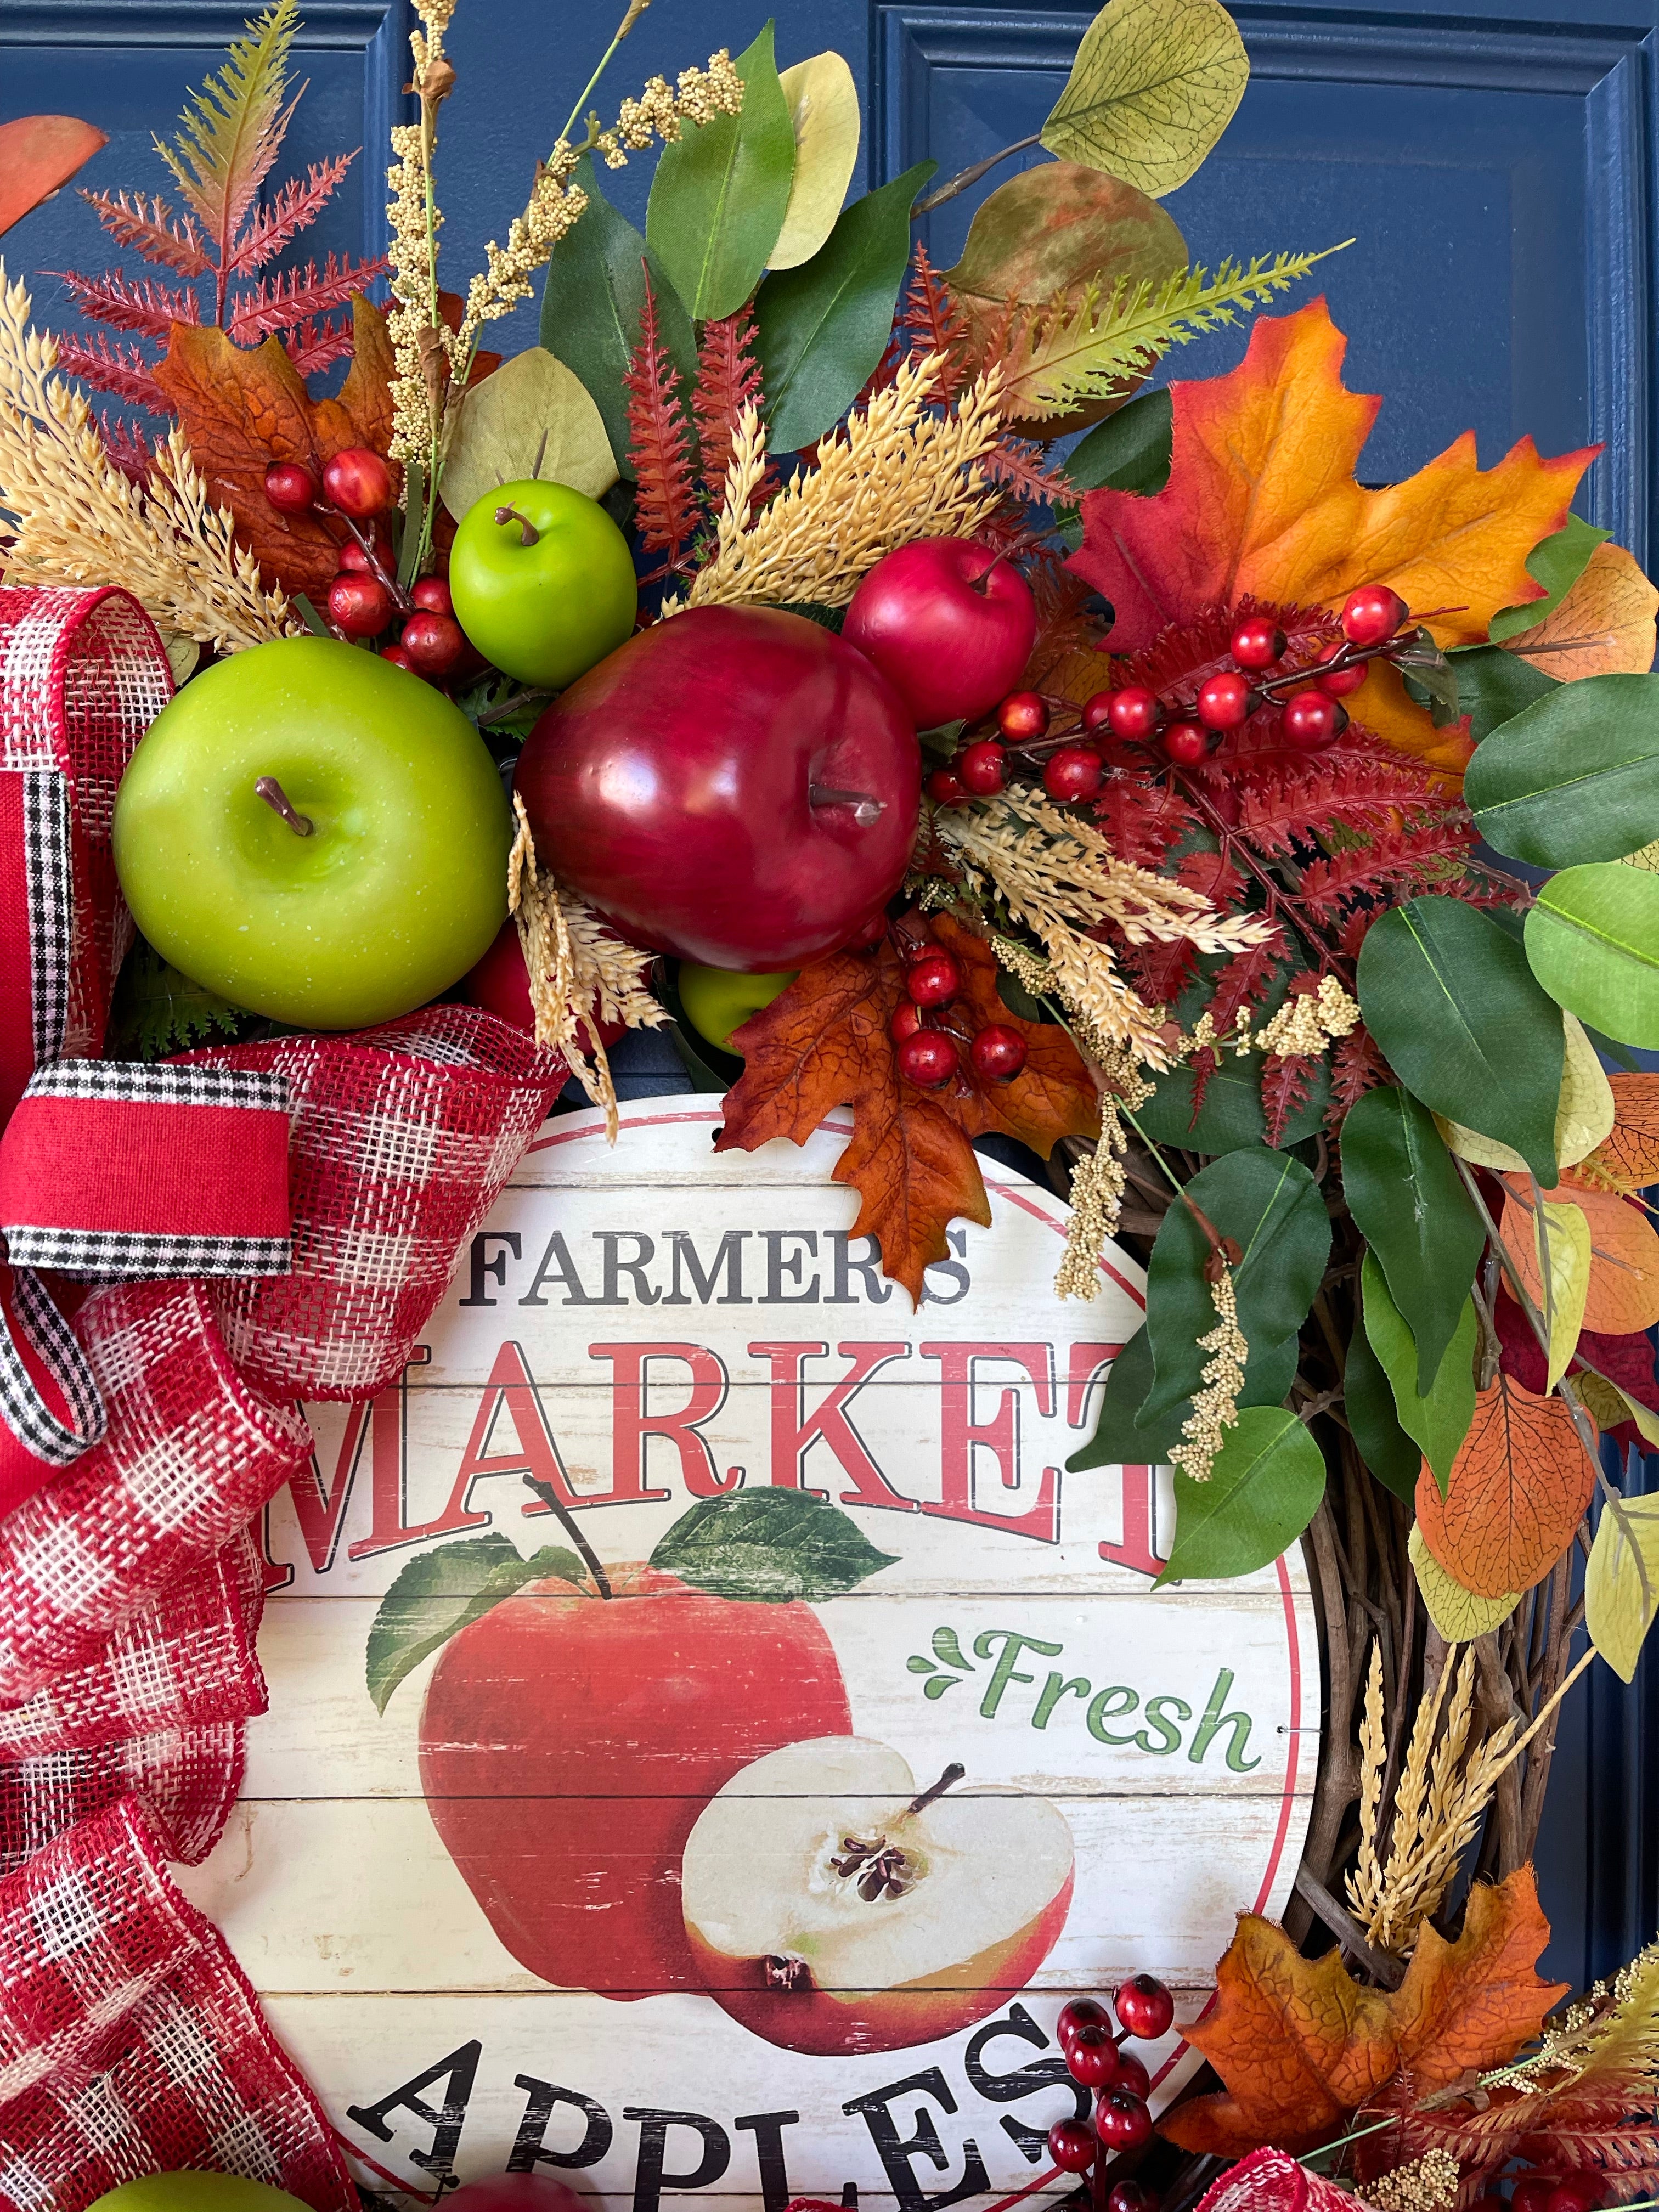 Close Up of Red and Green Small and Large Apples, Fall Leaves, Berries on a Grapevine Wreath with a Farmers Market Fresh Apple Sign